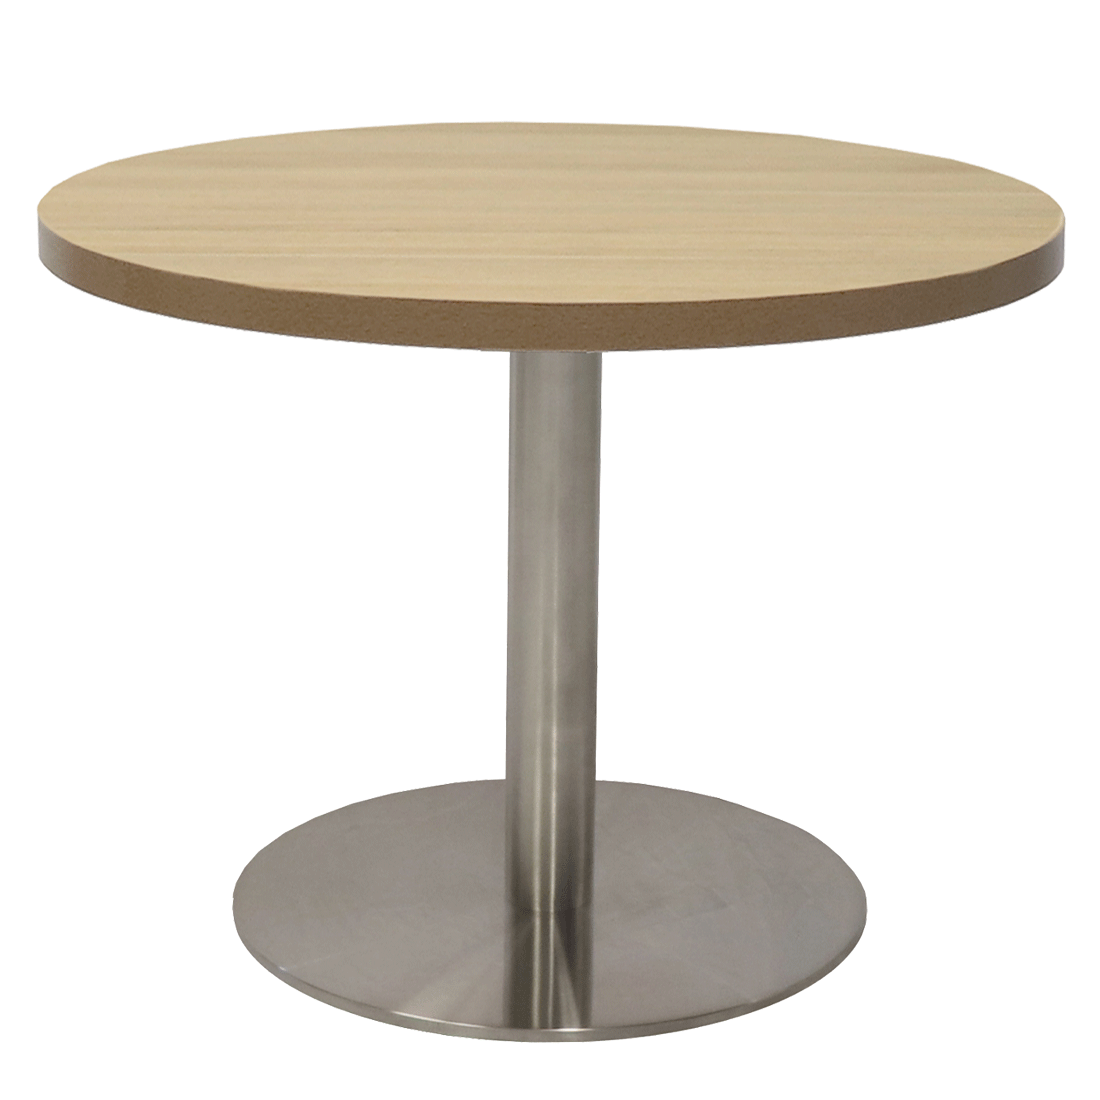 Round Coffee Table with flat Disc Base - switchoffice.com.au